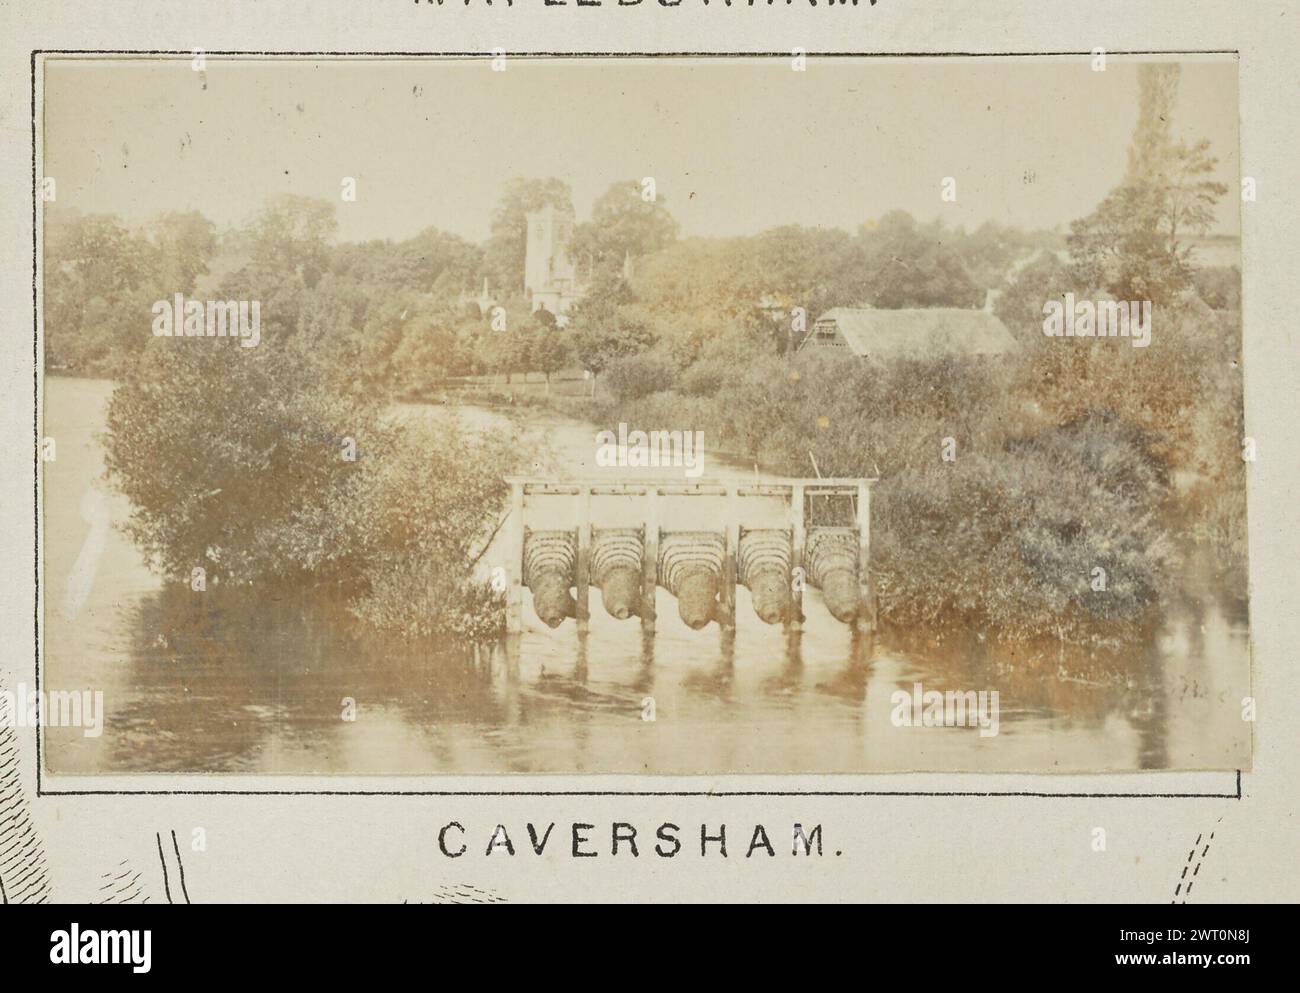 Caversham. Henry W. Taunt, photographer (British, 1842 - 1922) 1897 One of three tipped-in photographs illustrating a printed map of Mapledurham, Purley, Reading, and the surrounding area along the River Thames. The photograph shows a view of the river at Caversham, with a row of eel bucks standing in the river between the riverbank and a small island. Houses are visible on the riverbanks in the background. (Recto, mount) lower center, below image, printed in black ink: 'CAVERSHAM.' Stock Photo